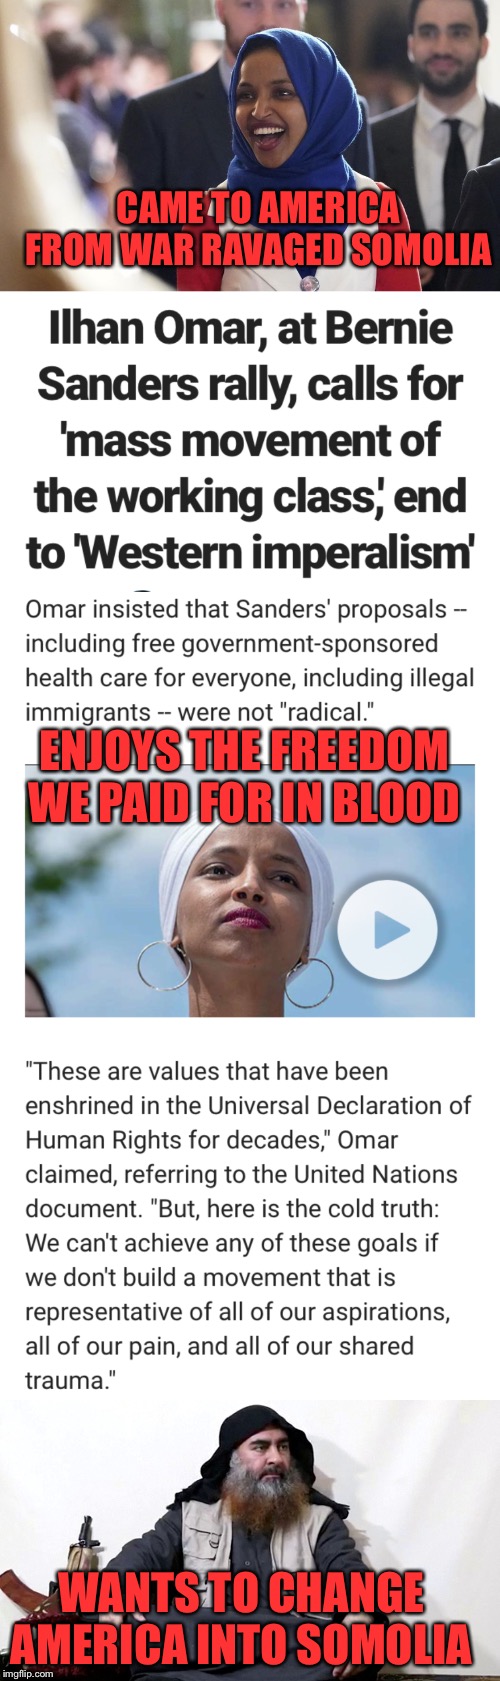 Third world Manchurian Candidate | CAME TO AMERICA FROM WAR RAVAGED SOMOLIA; ENJOYS THE FREEDOM WE PAID FOR IN BLOOD; WANTS TO CHANGE AMERICA INTO SOMOLIA | image tagged in rep ilhan omar,communist socialist,america,third world,immigration | made w/ Imgflip meme maker